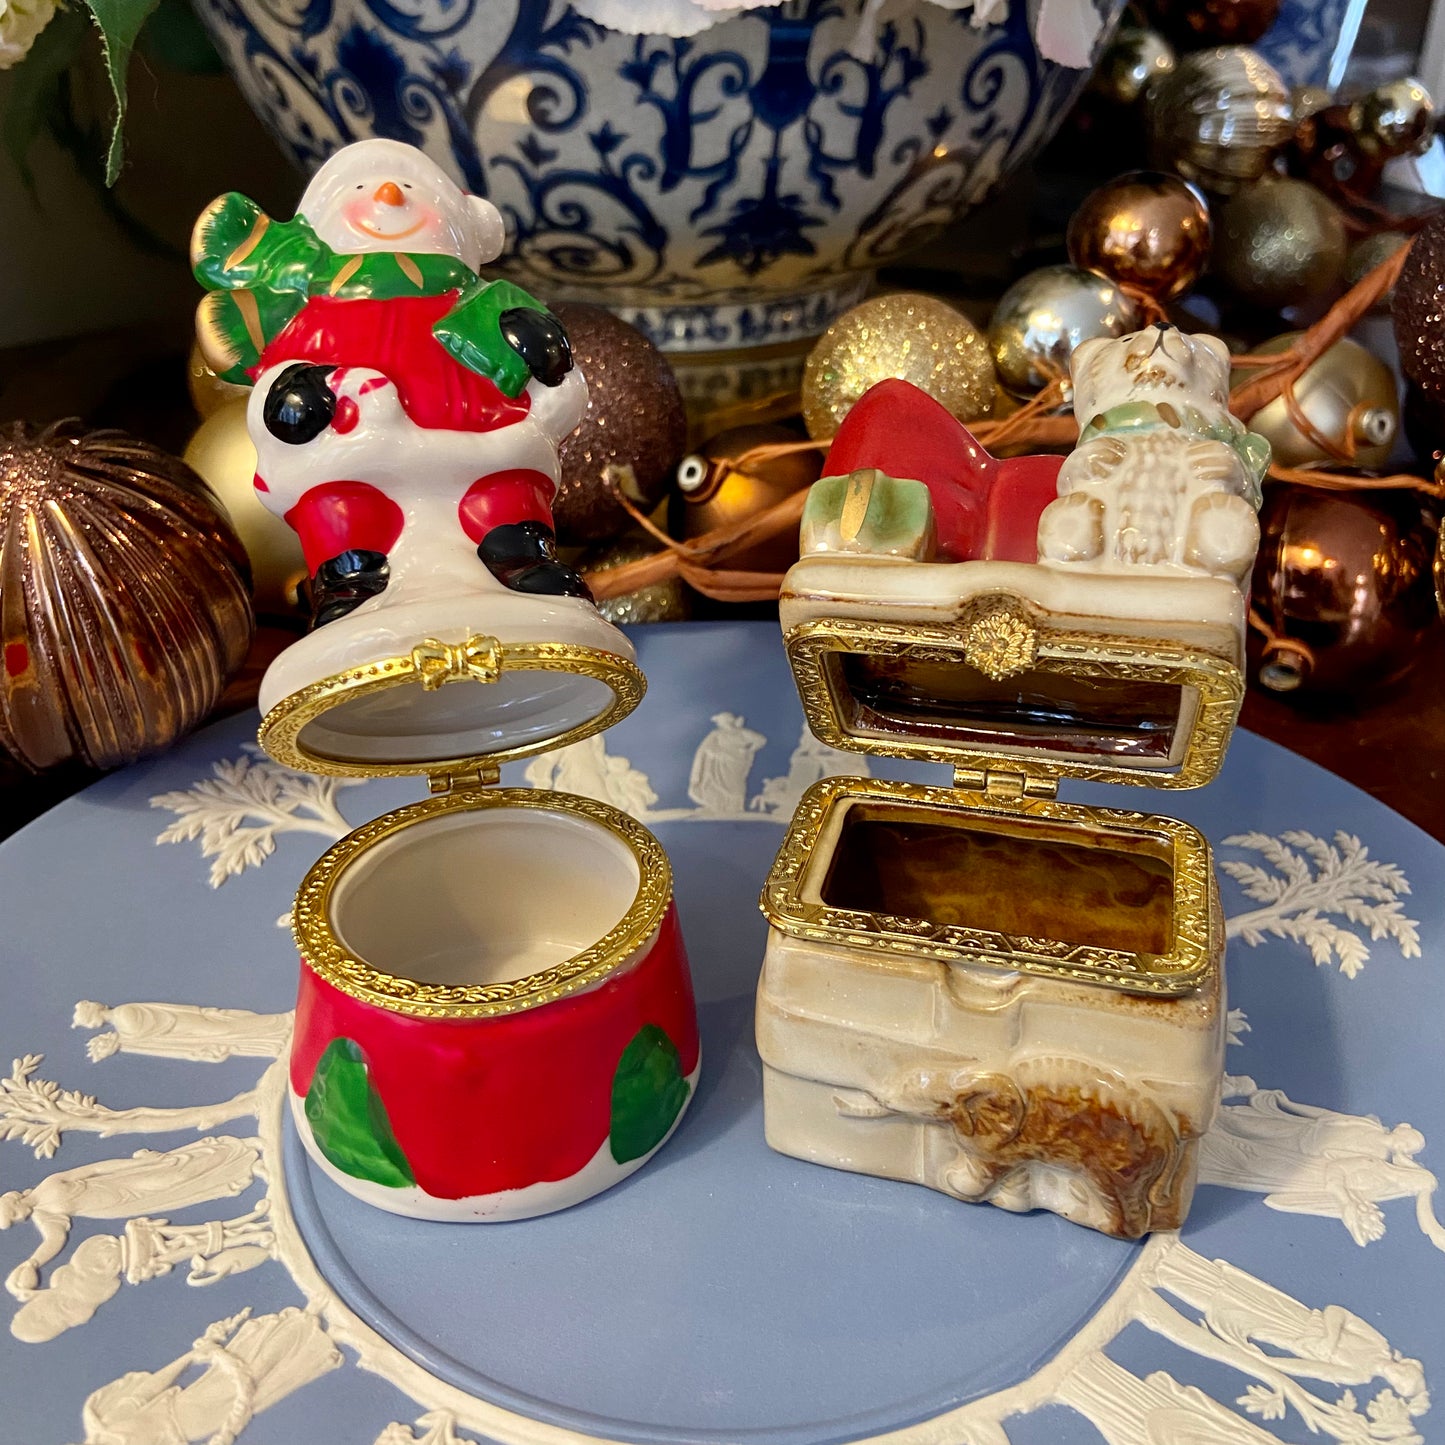 Set of 2 charming holiday lil boxes